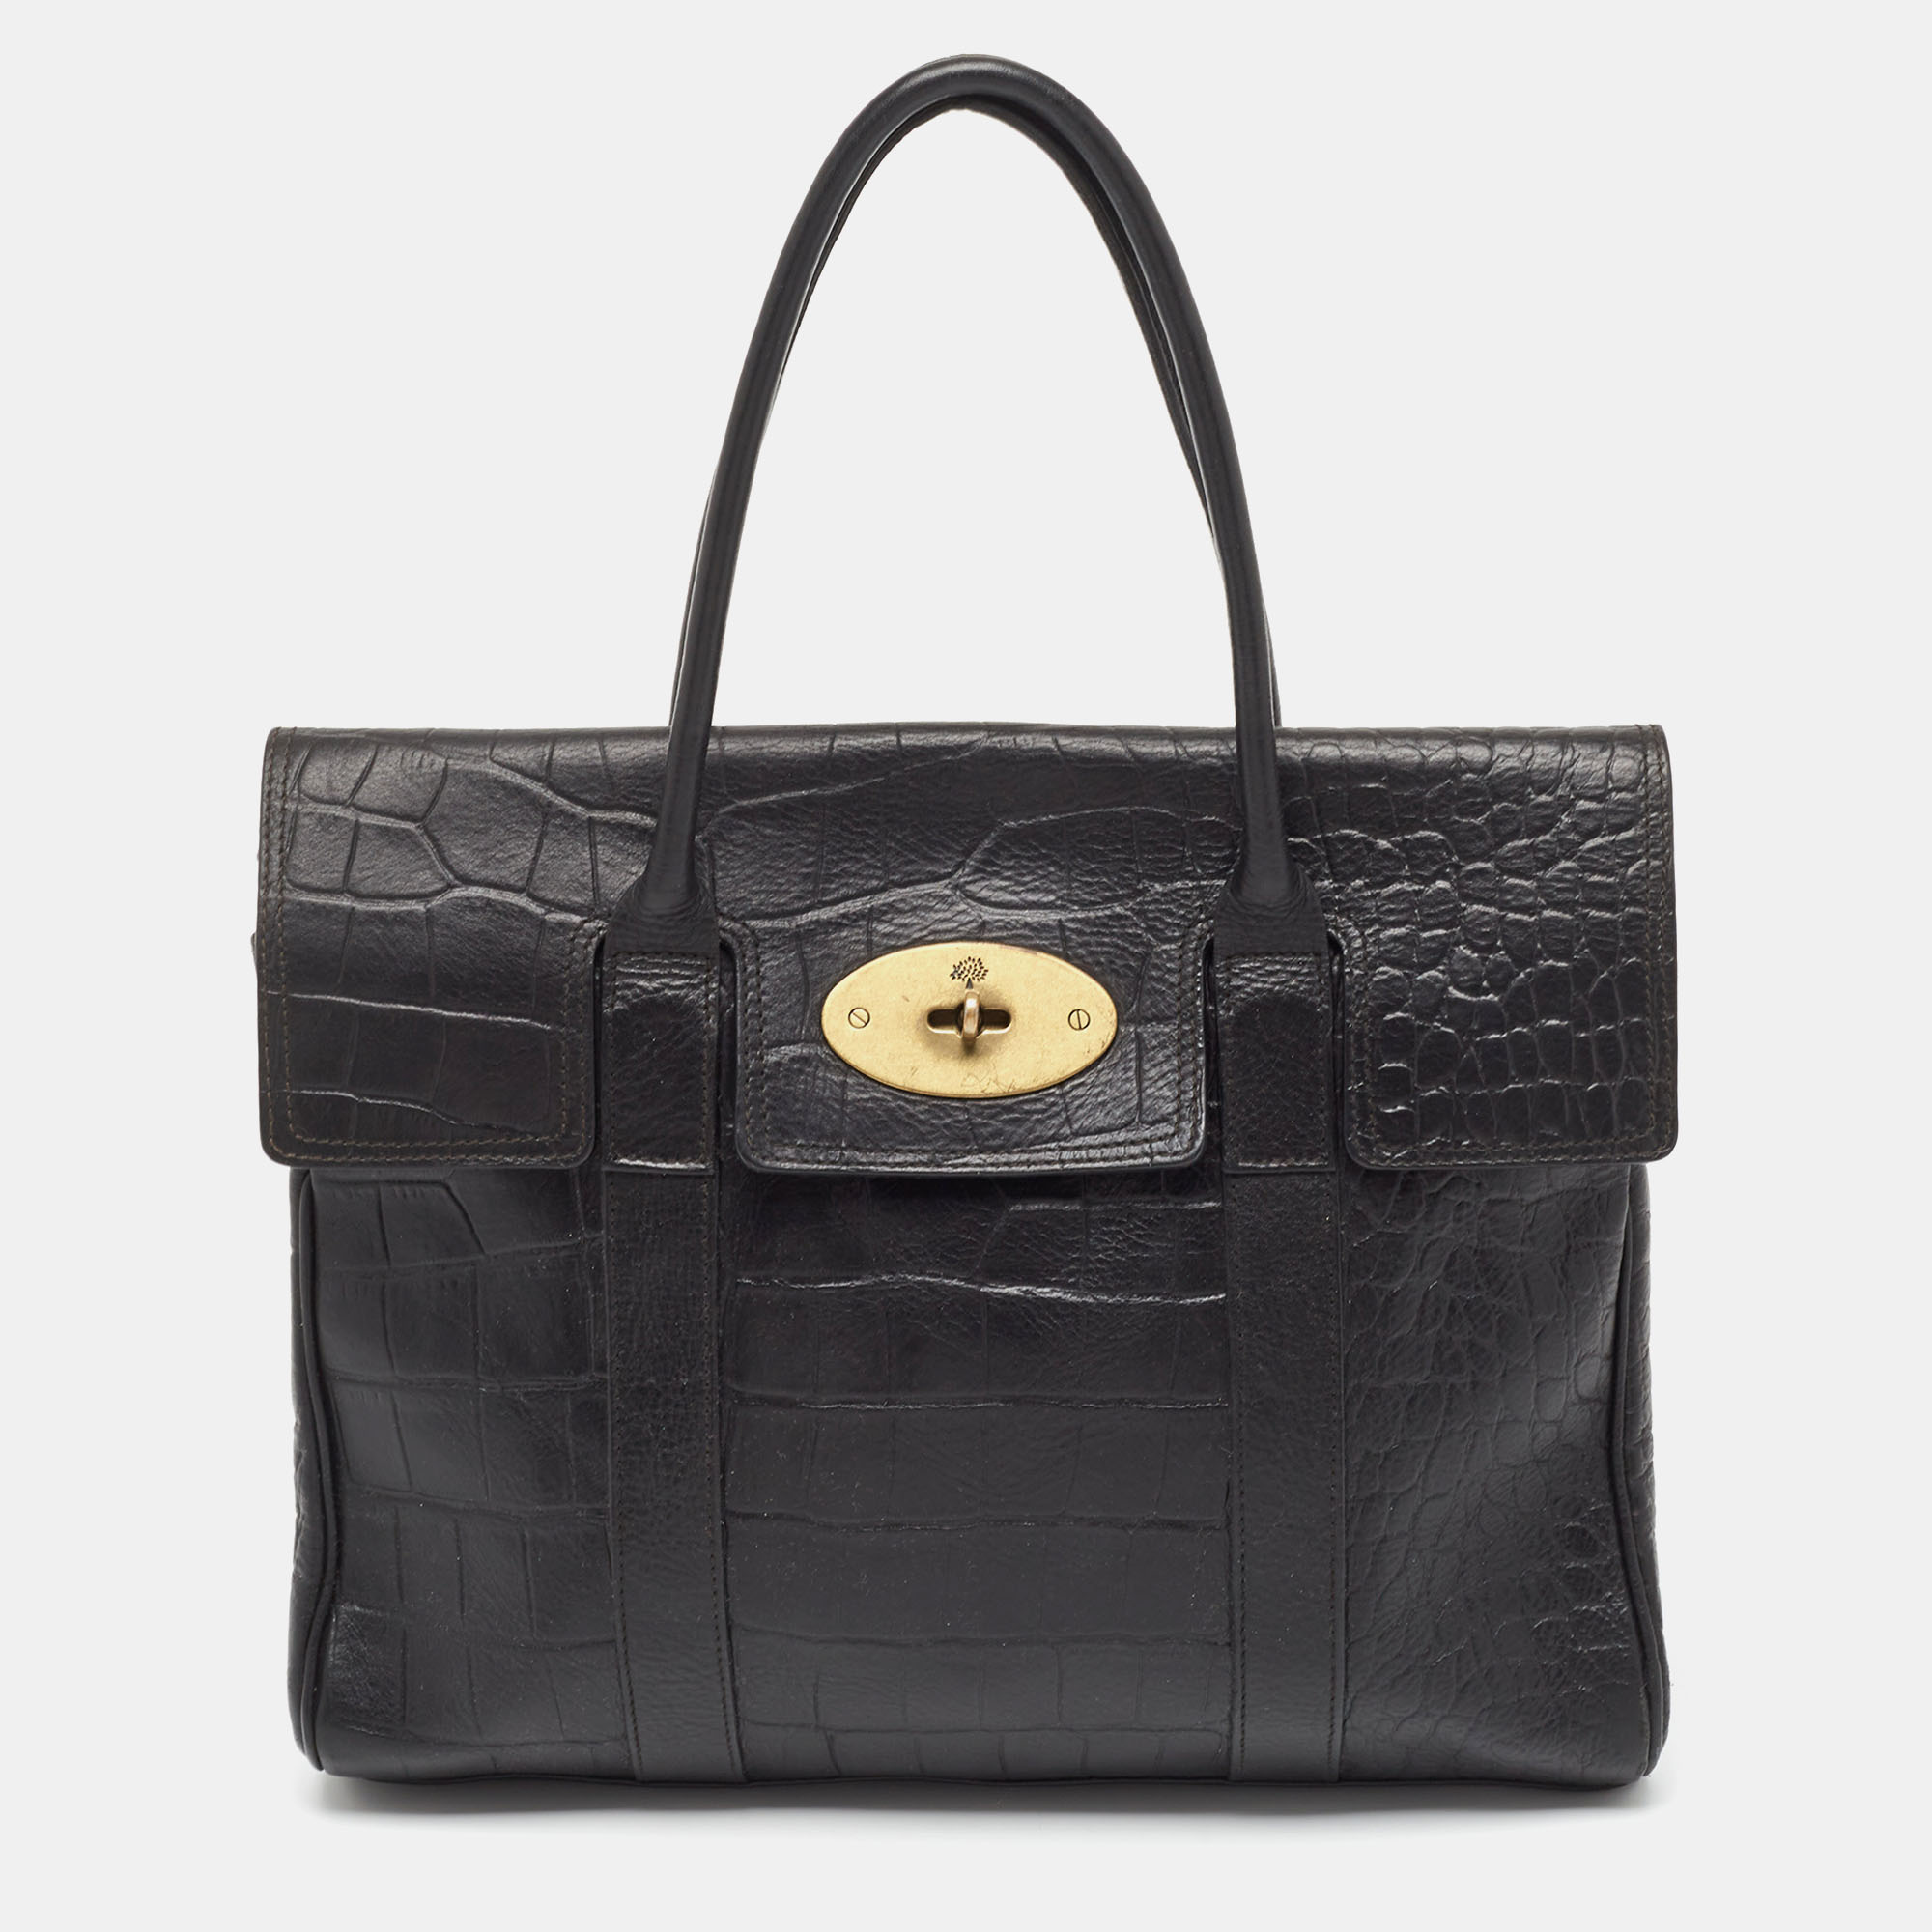 Mulberry Black Croc Embossed Leather Bayswater Satchel